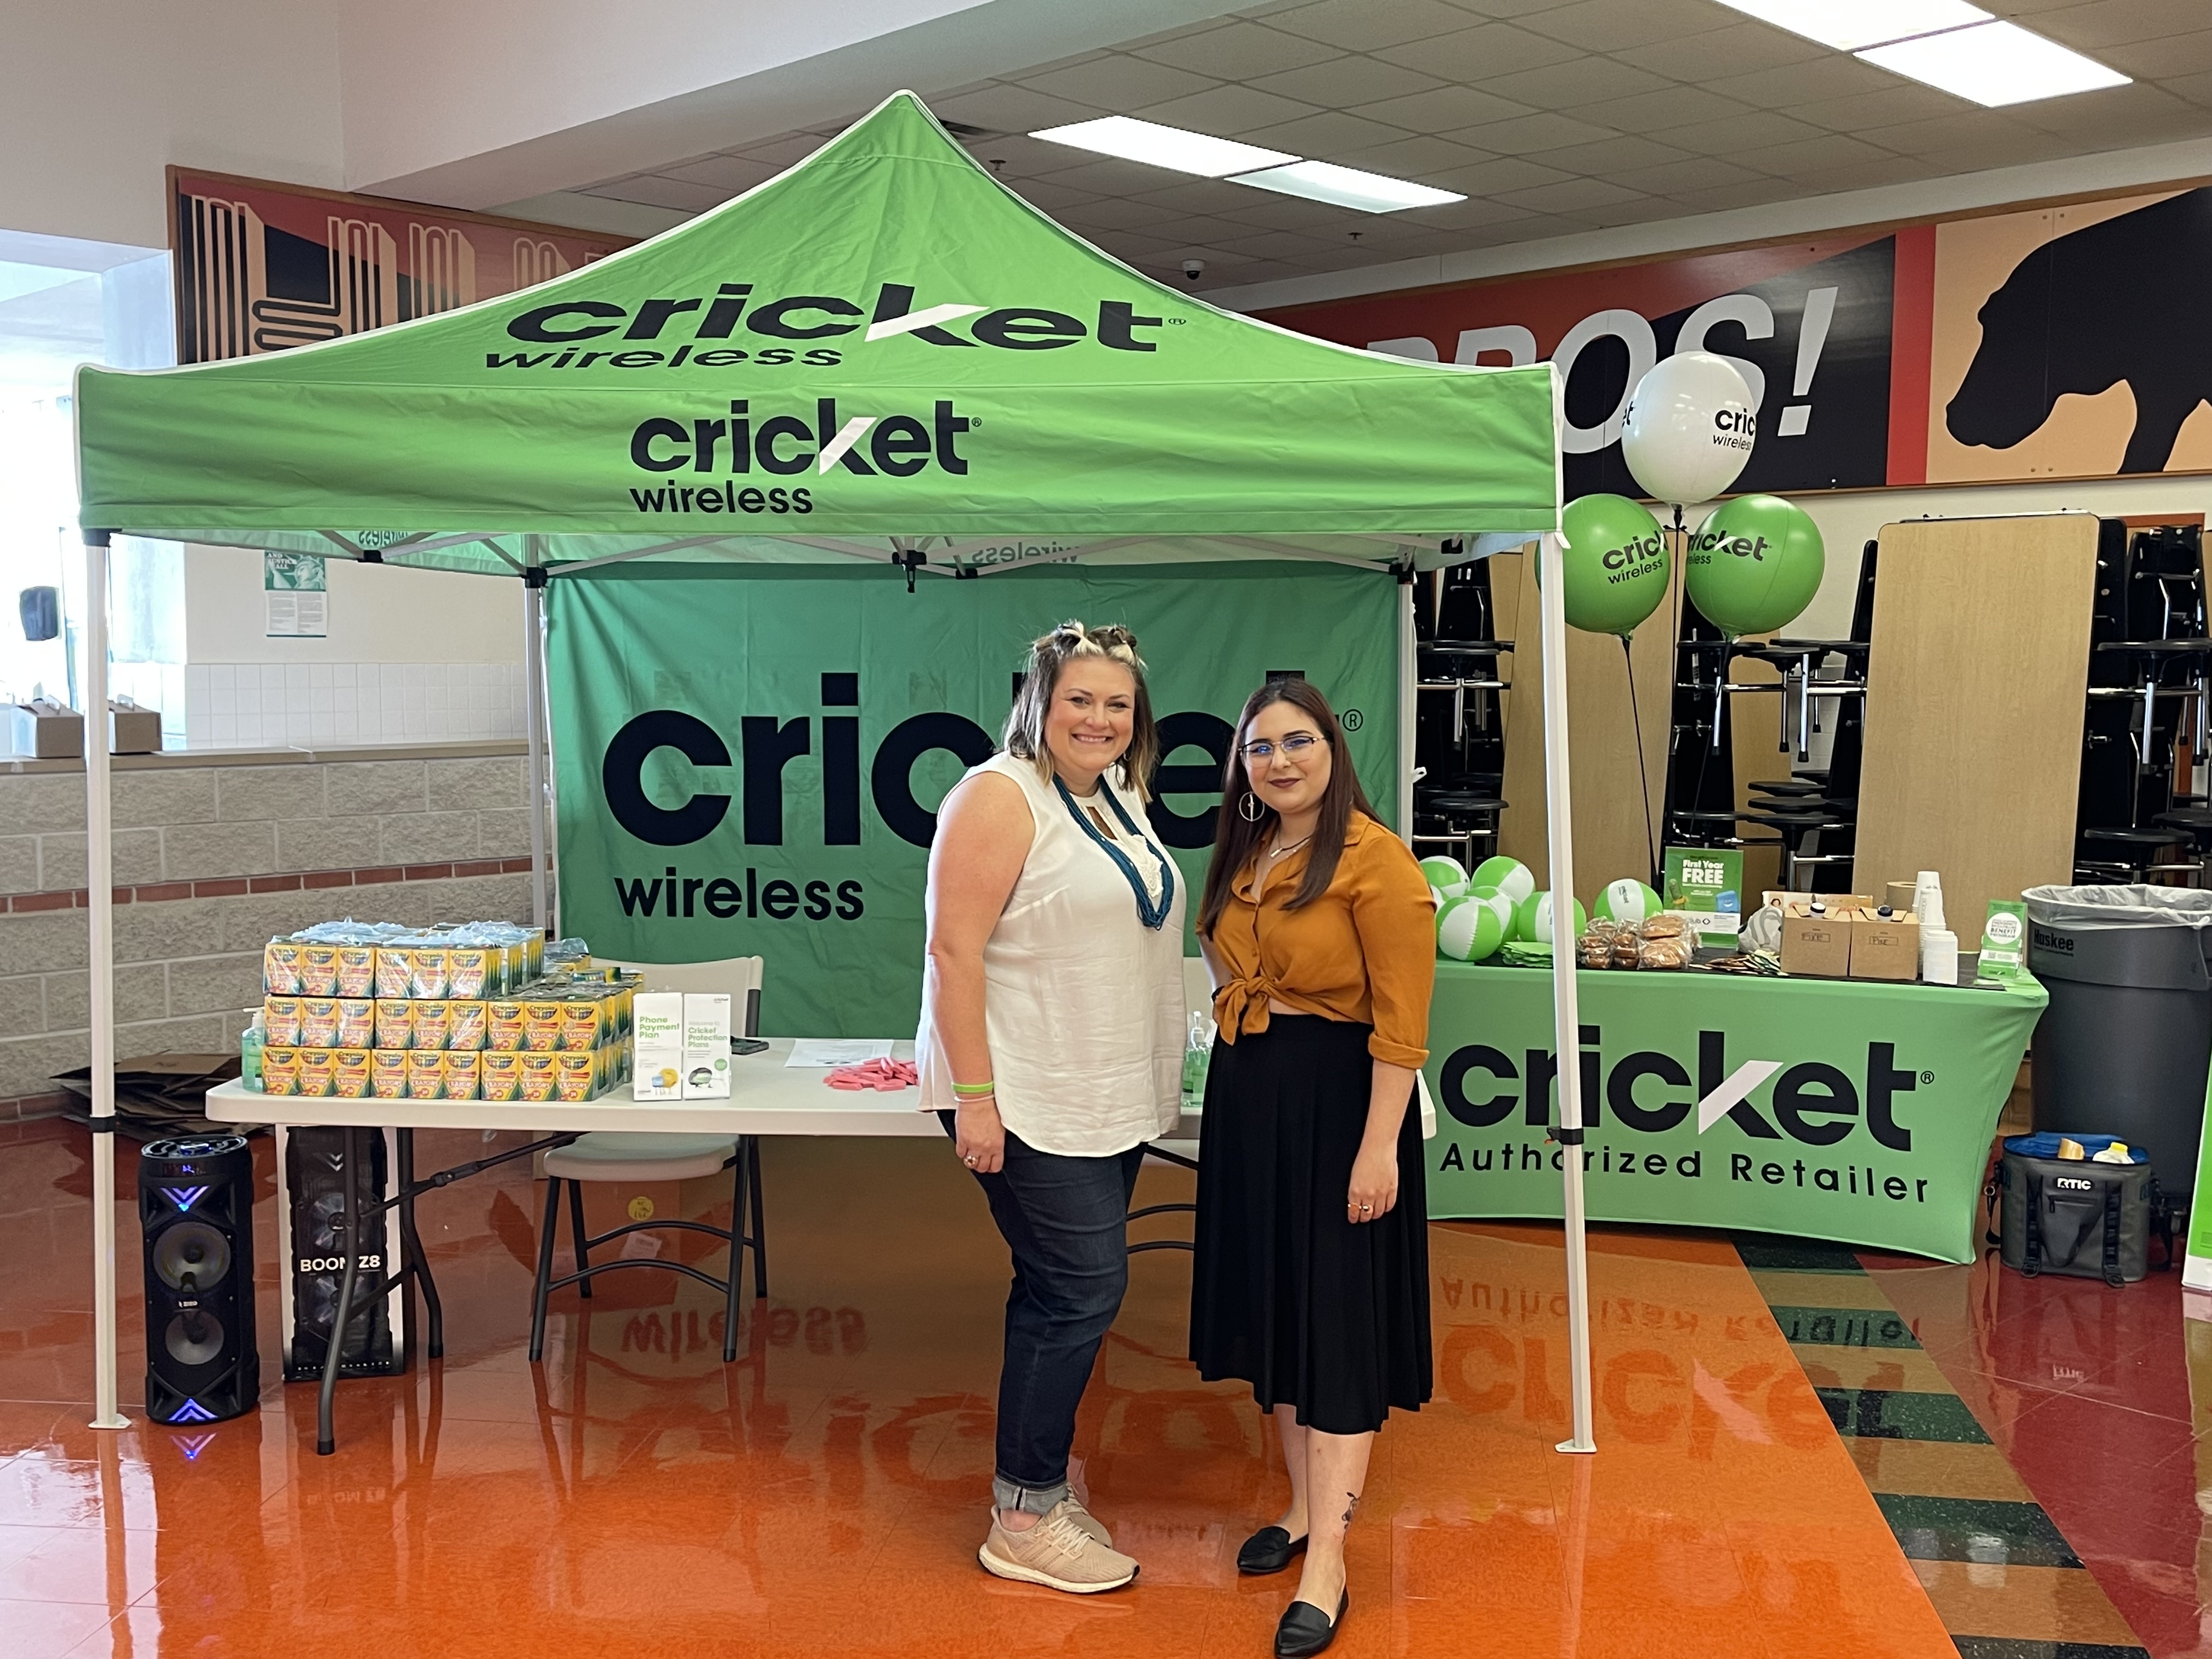 Cricket ARs at event in Hutto, TX